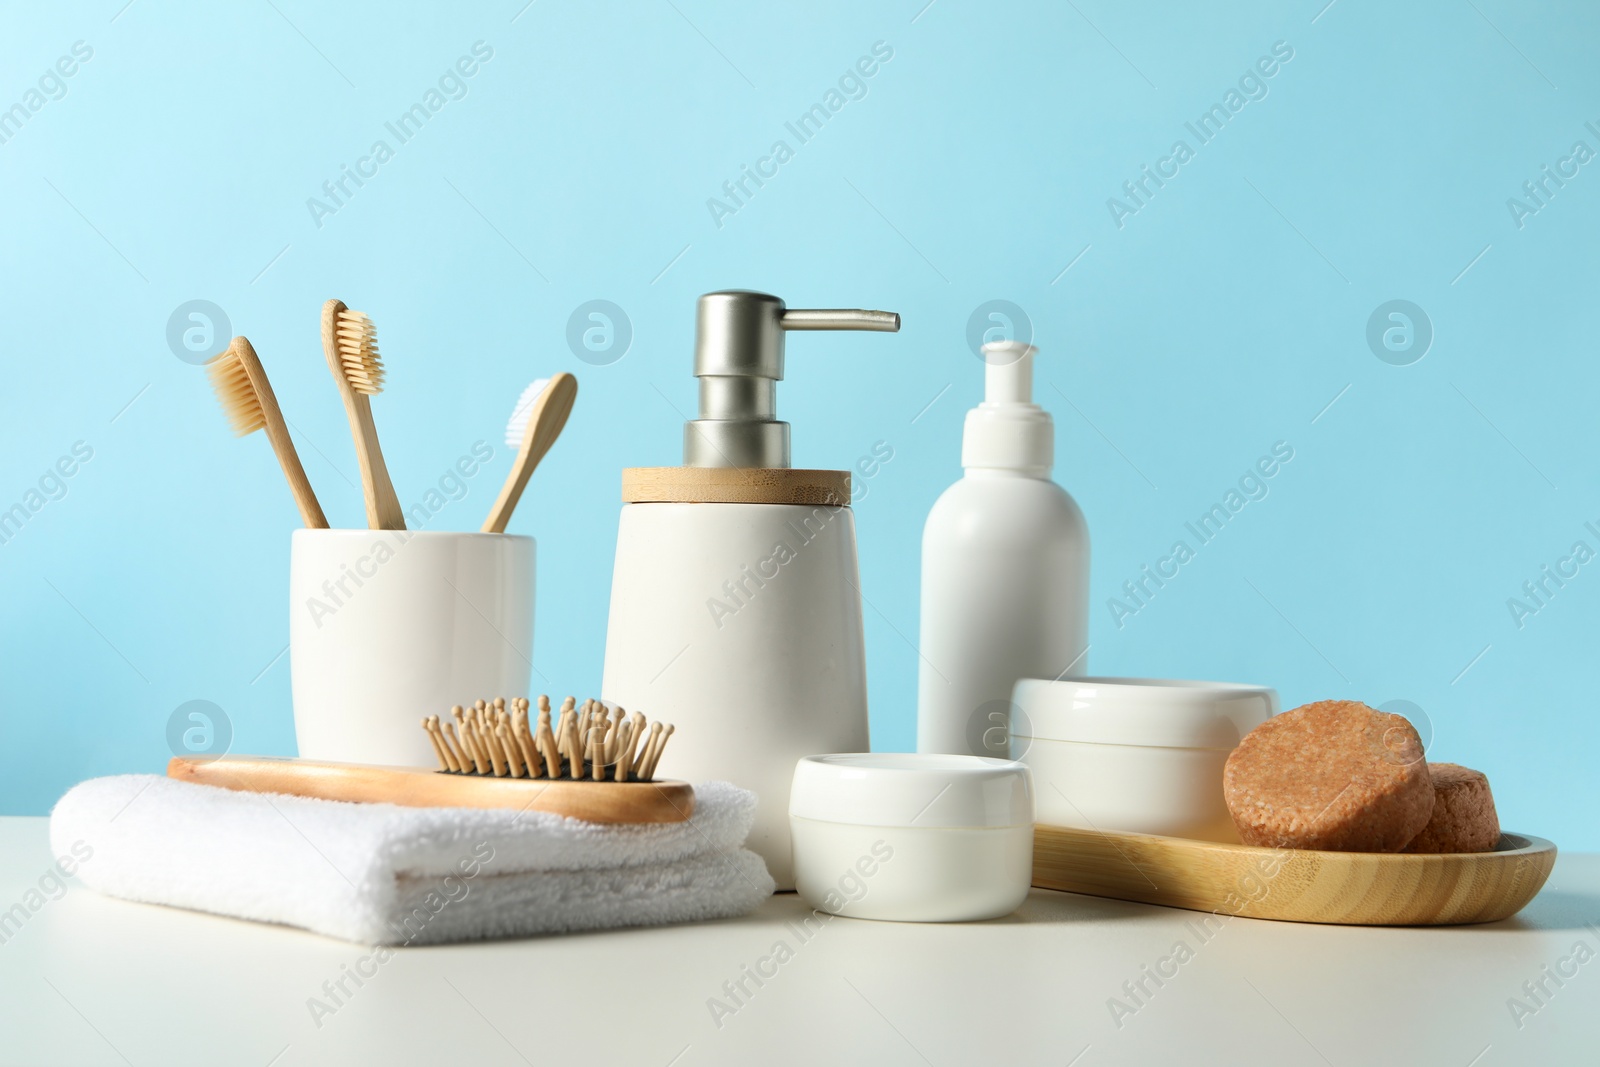 Photo of Different bath accessories on white table against light blue background